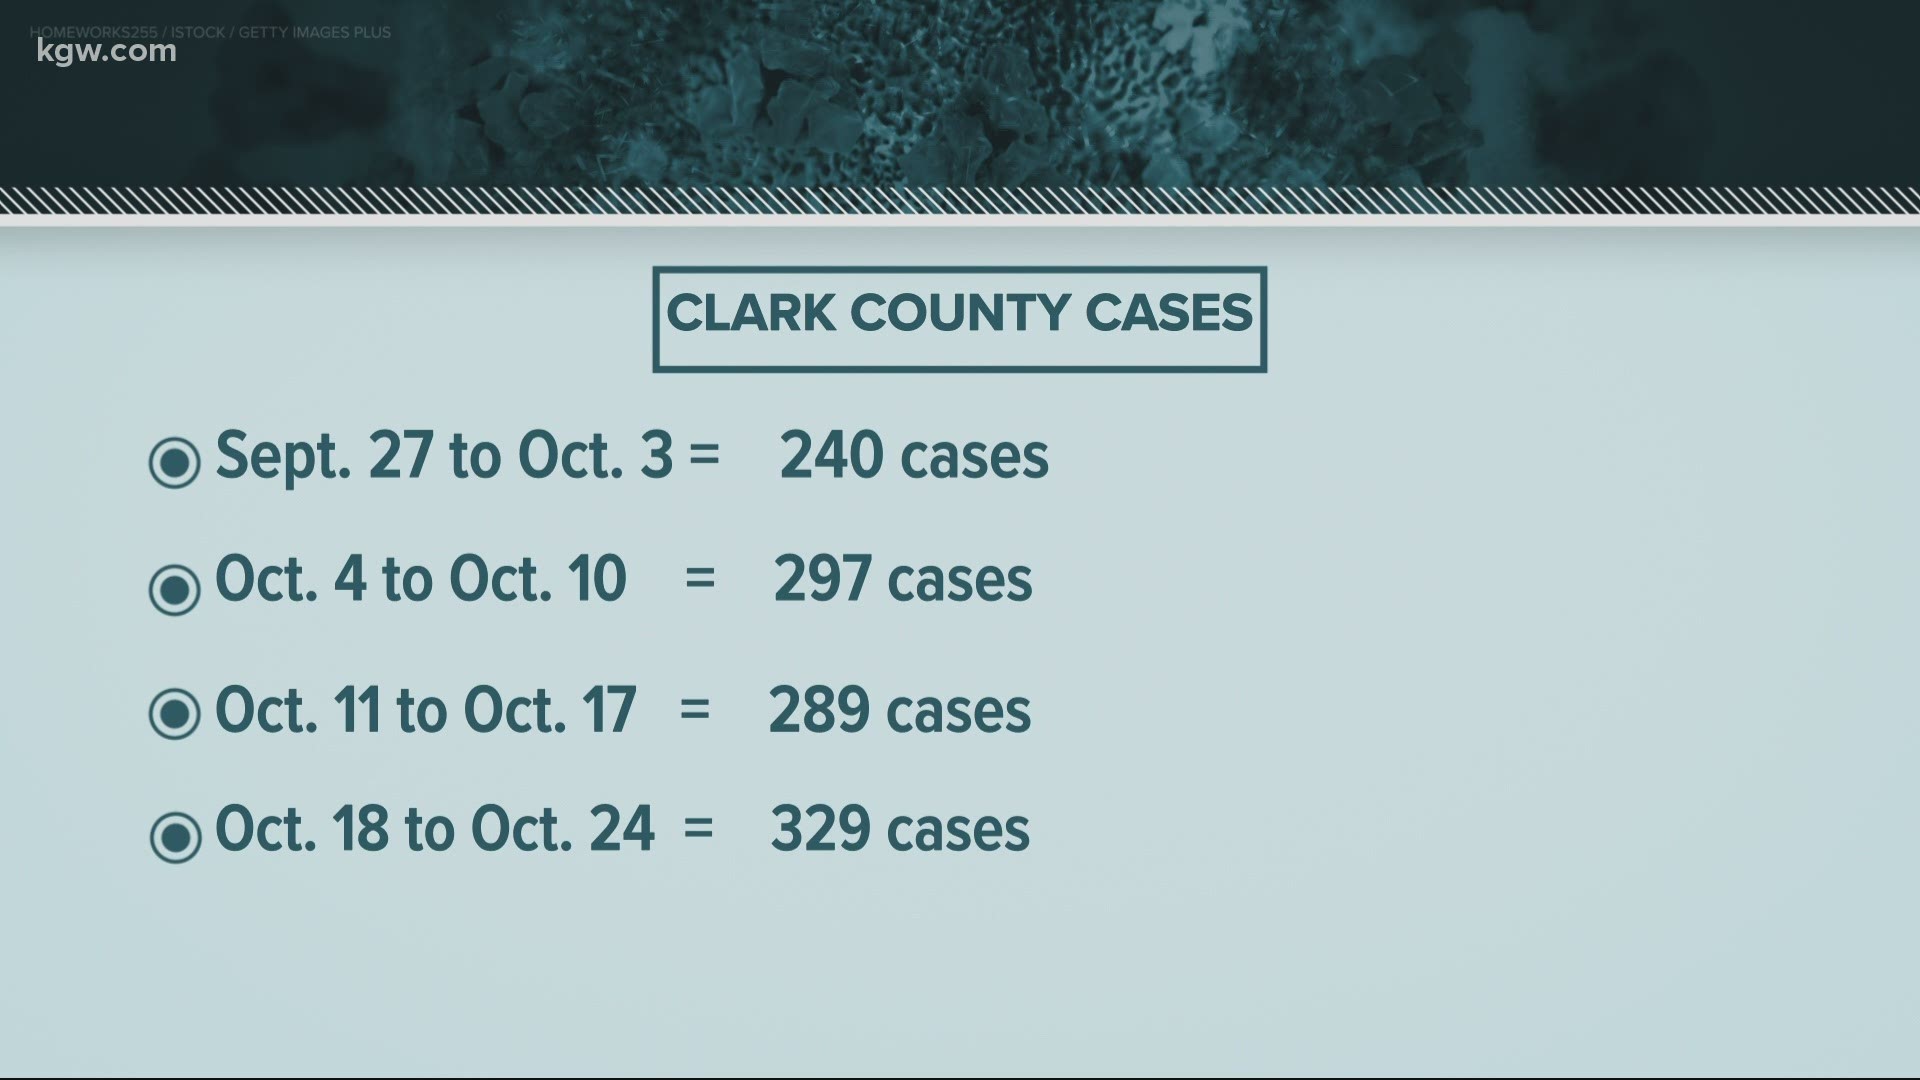 COVID-19 cases are spiking in Clark County. Devon Haskins checks in with hospitals, businesses and schools.